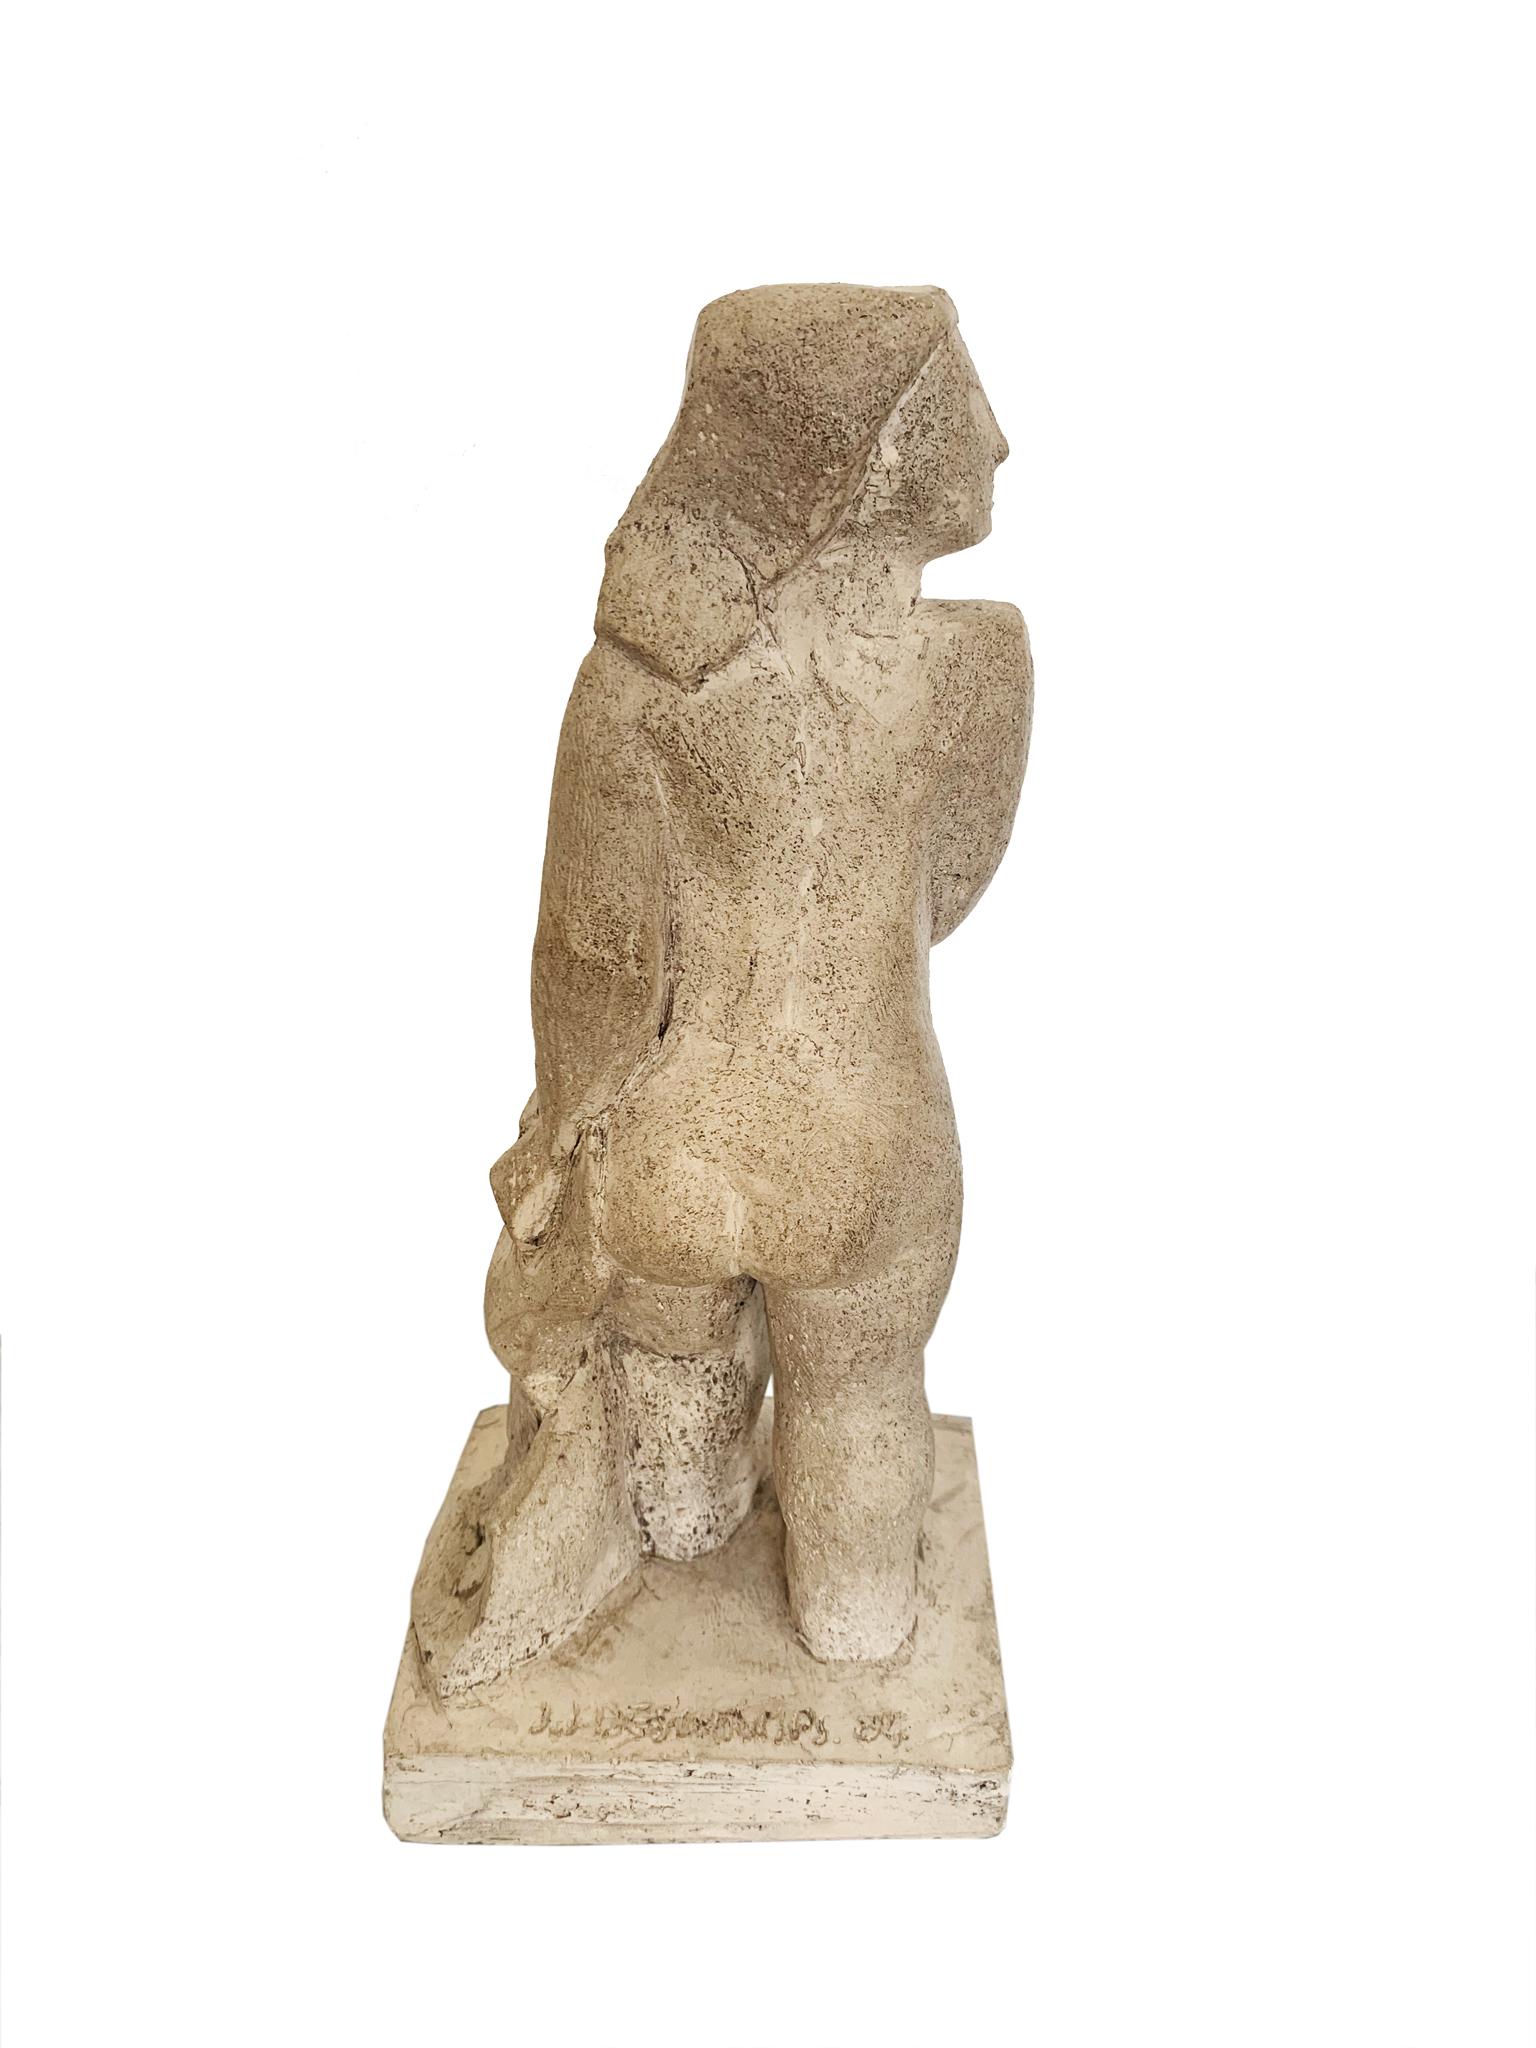 Other CUBIST FEMALE PLASTER SCULPTURE by Jean Jacques Deschamps, French, 20th Century